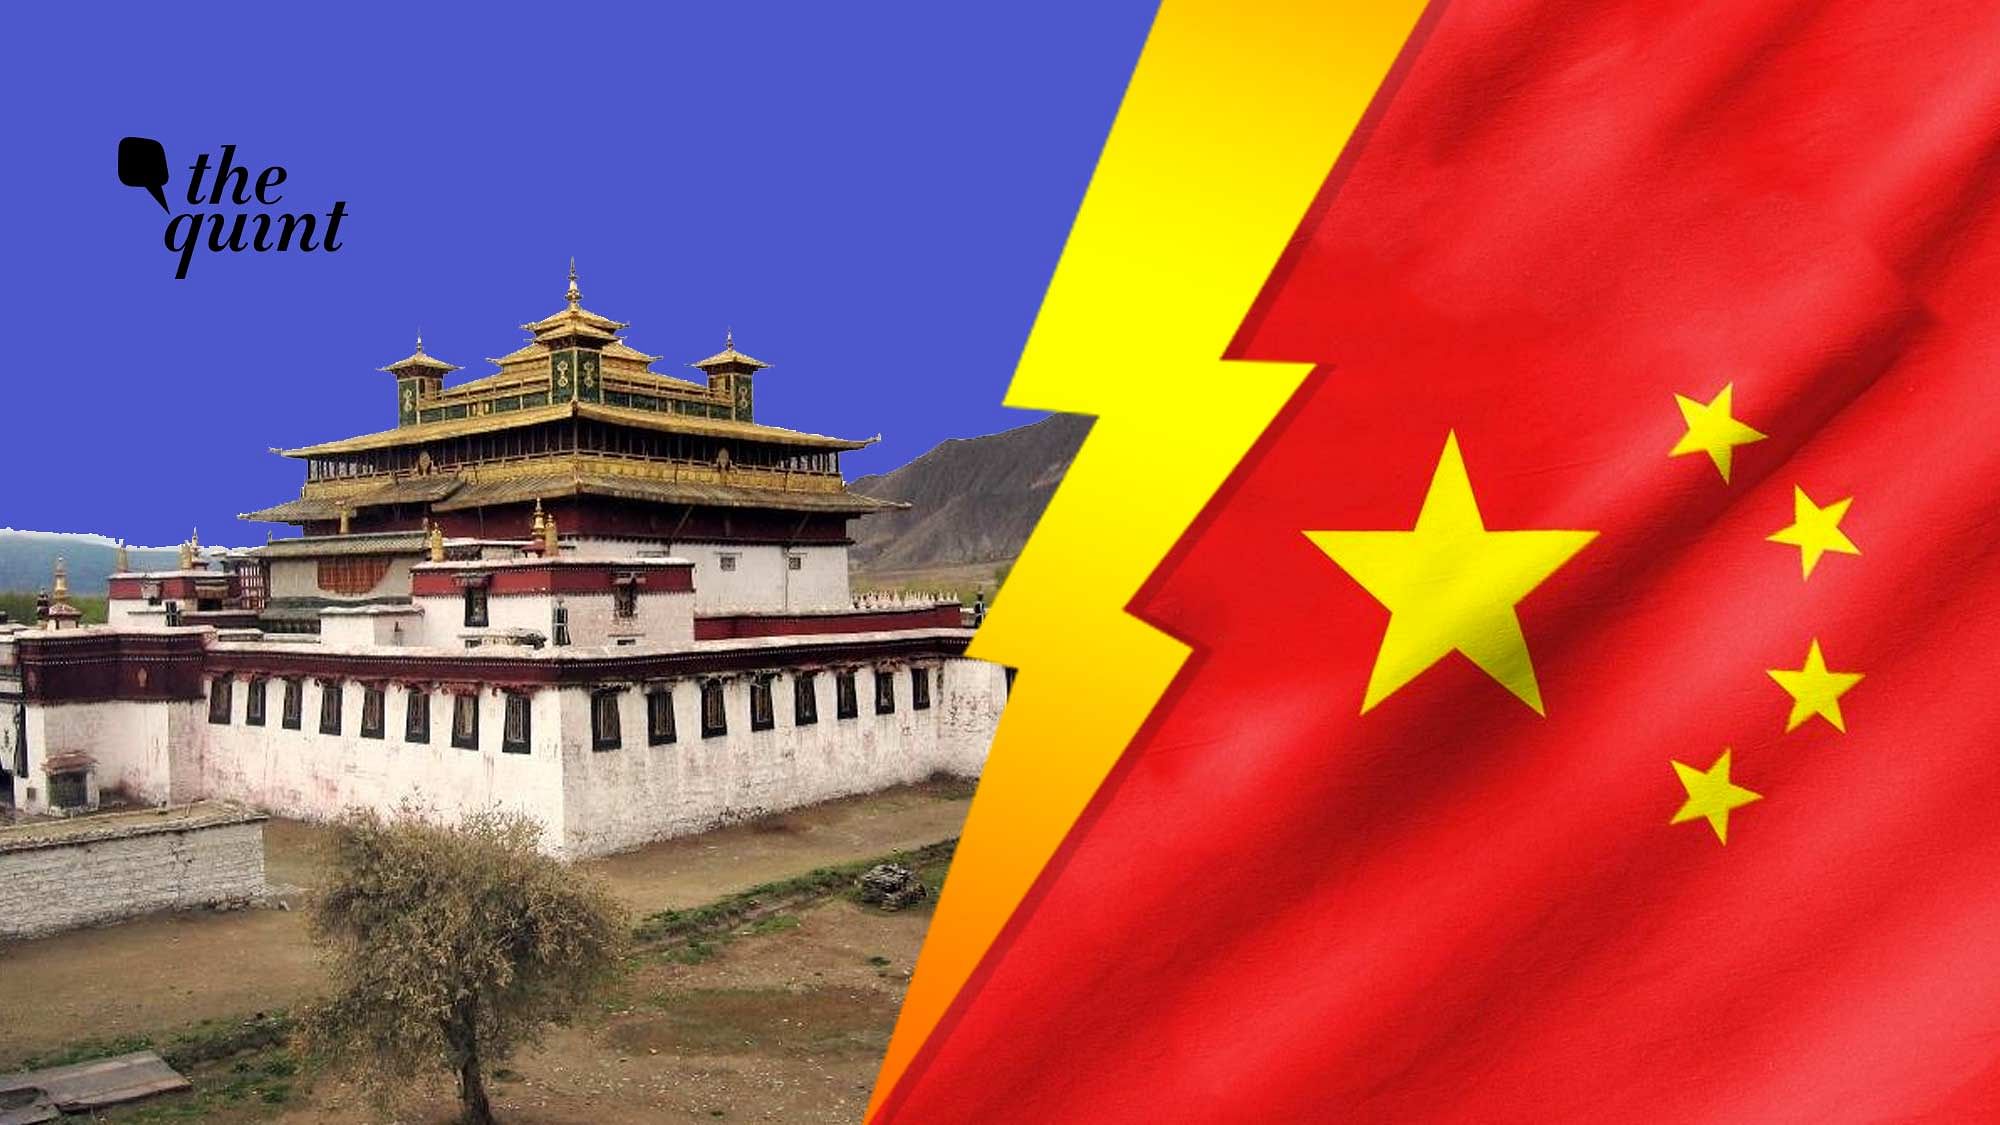 Samye, the first gompa (Buddhist monastery) built in Tibet (775-779) (Left) and Chinese flat (Right) used for representational purposes.